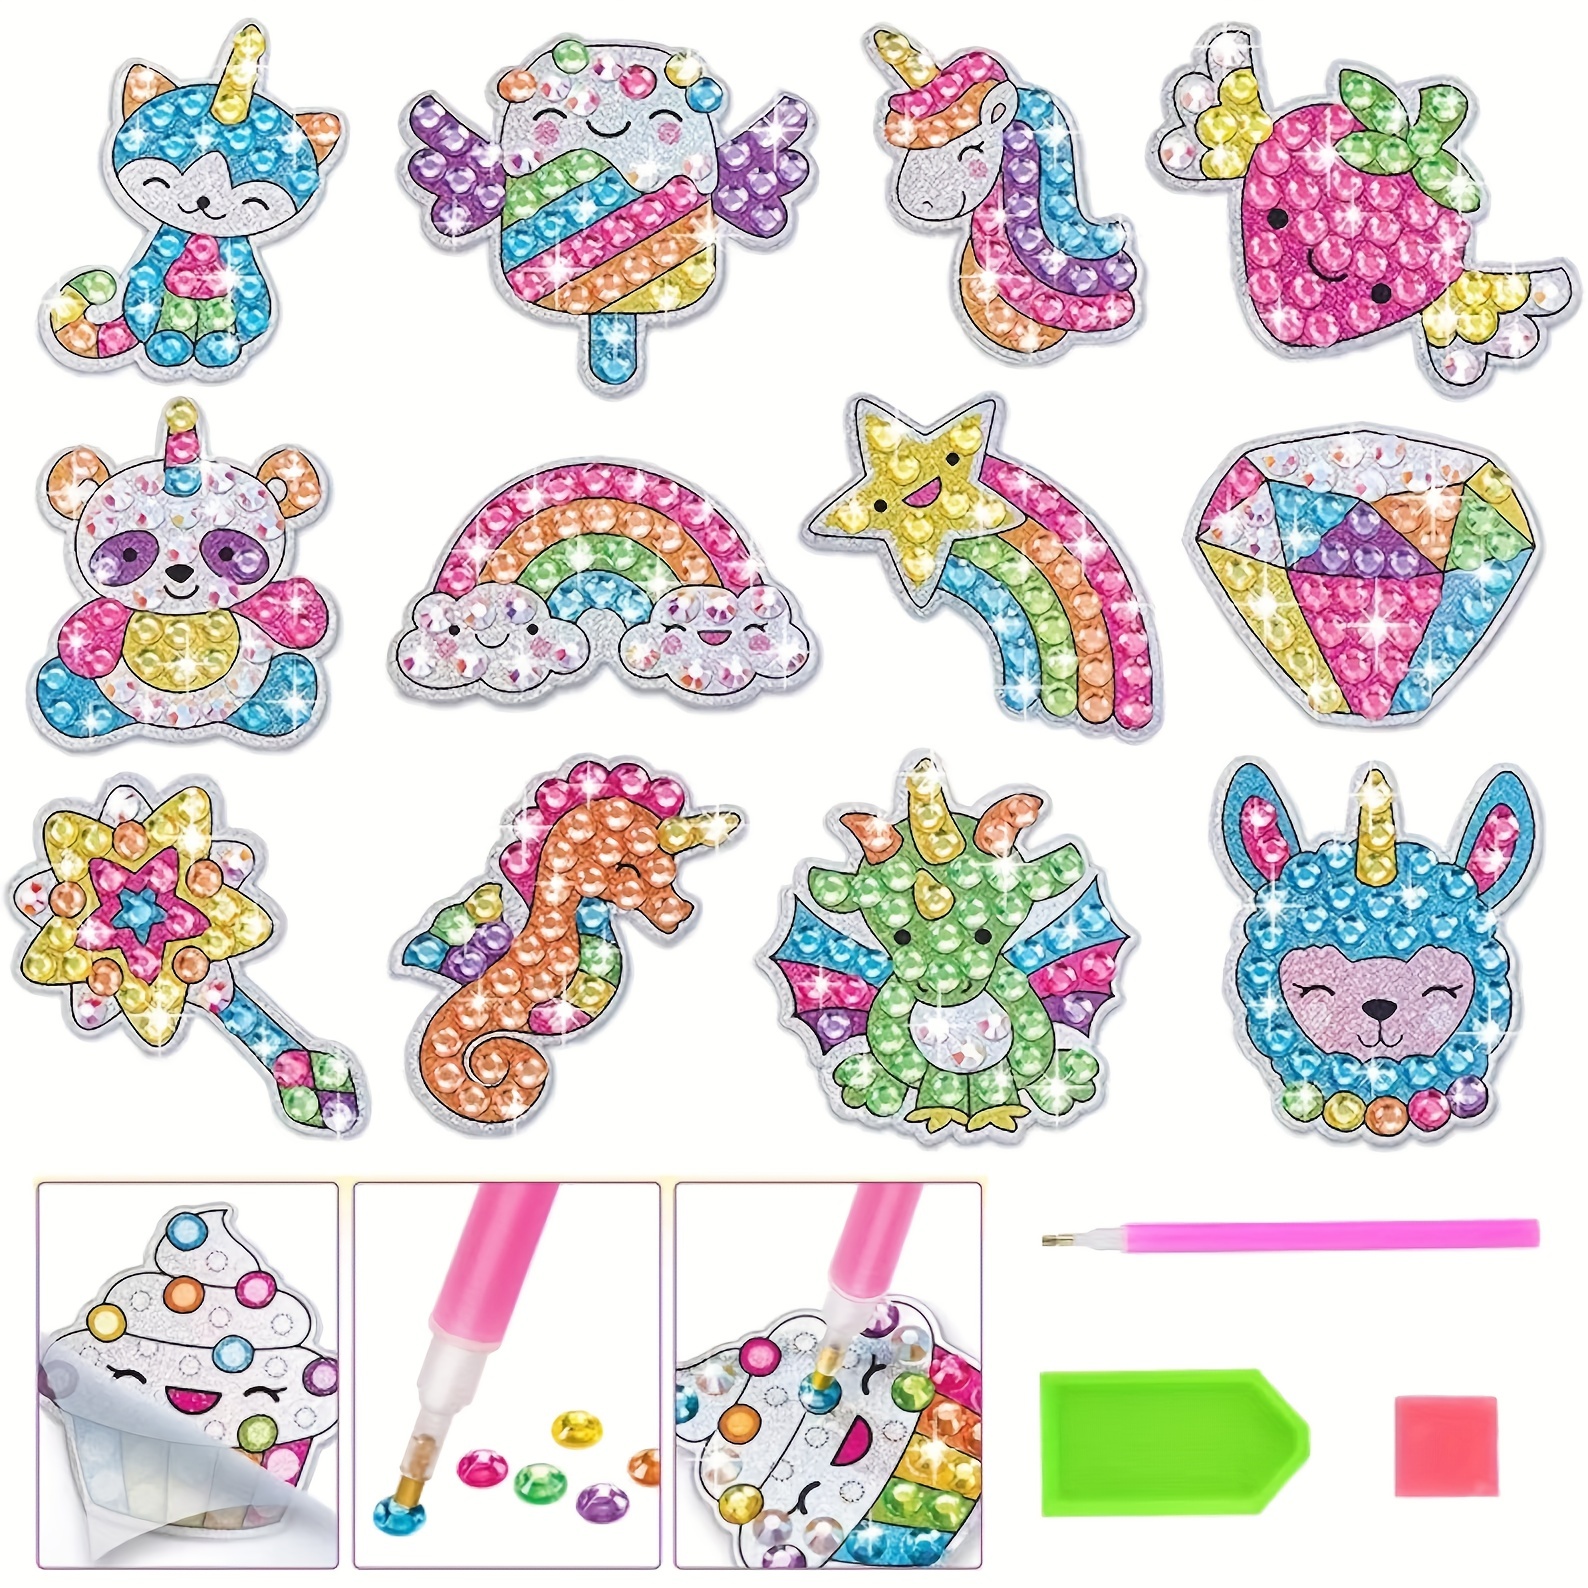 Junrife Cute Diamond Painting Stickers Kits for Kids Anime Craft Arts Set -  Best Gifts for Children or Adult Beginners StitchStyle 9PCS